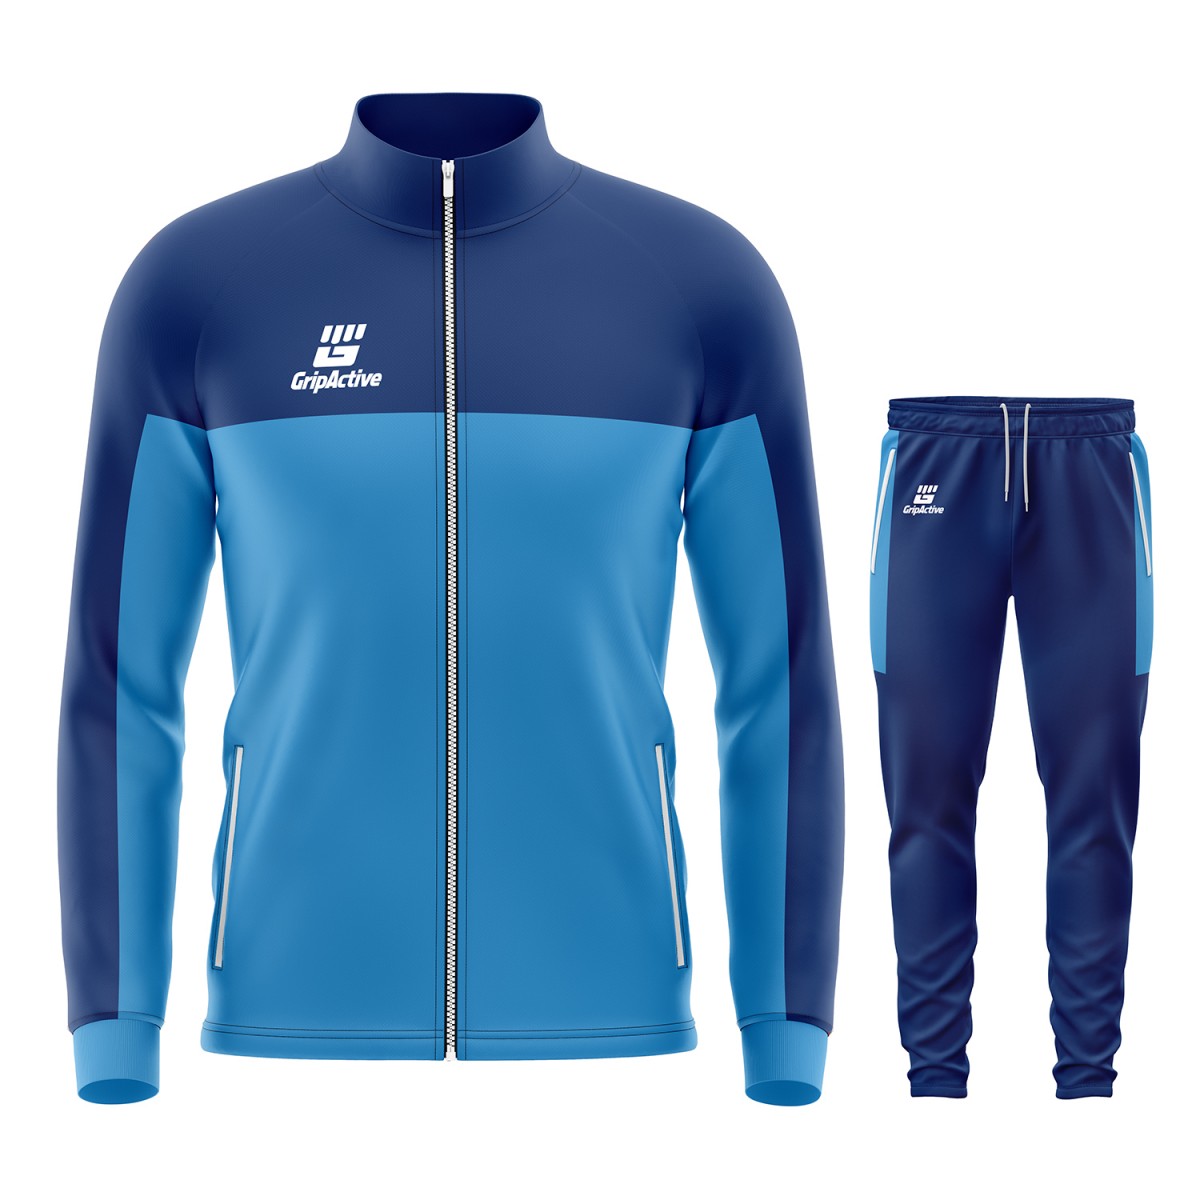 Grip Active Blue and Navy Full Zip Sports Tracksuit